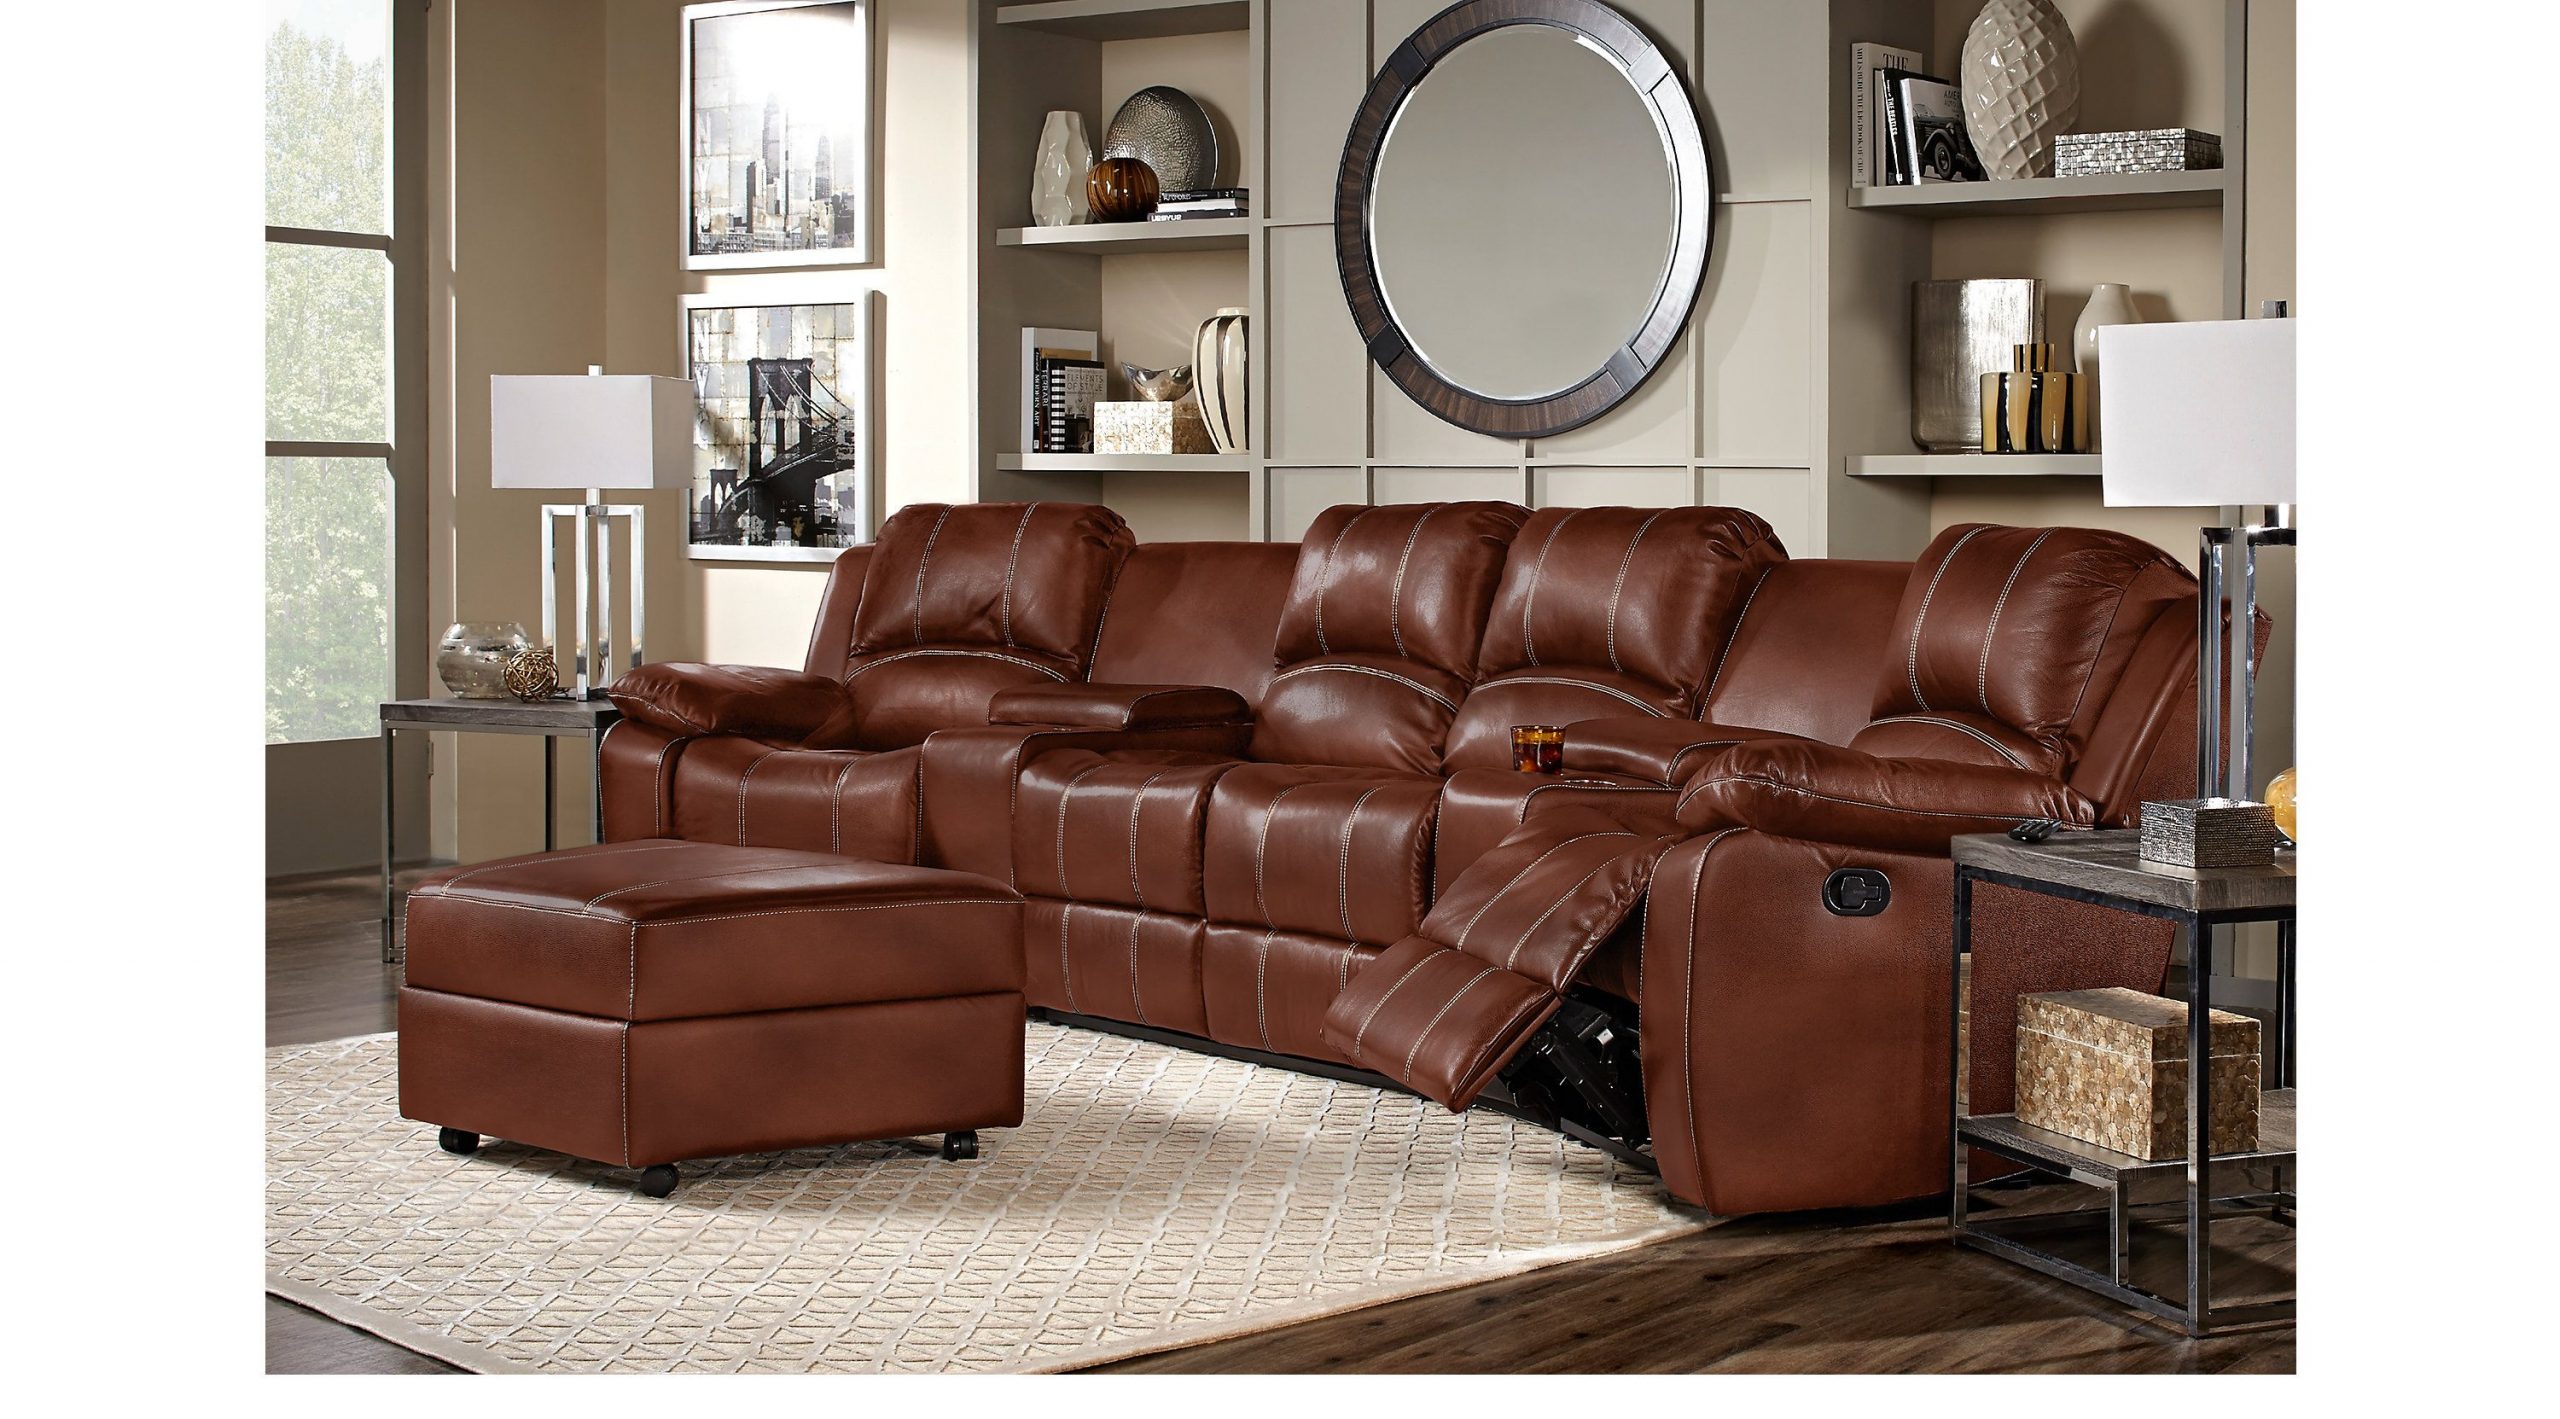 Best Price On Leather Living Room Furniture